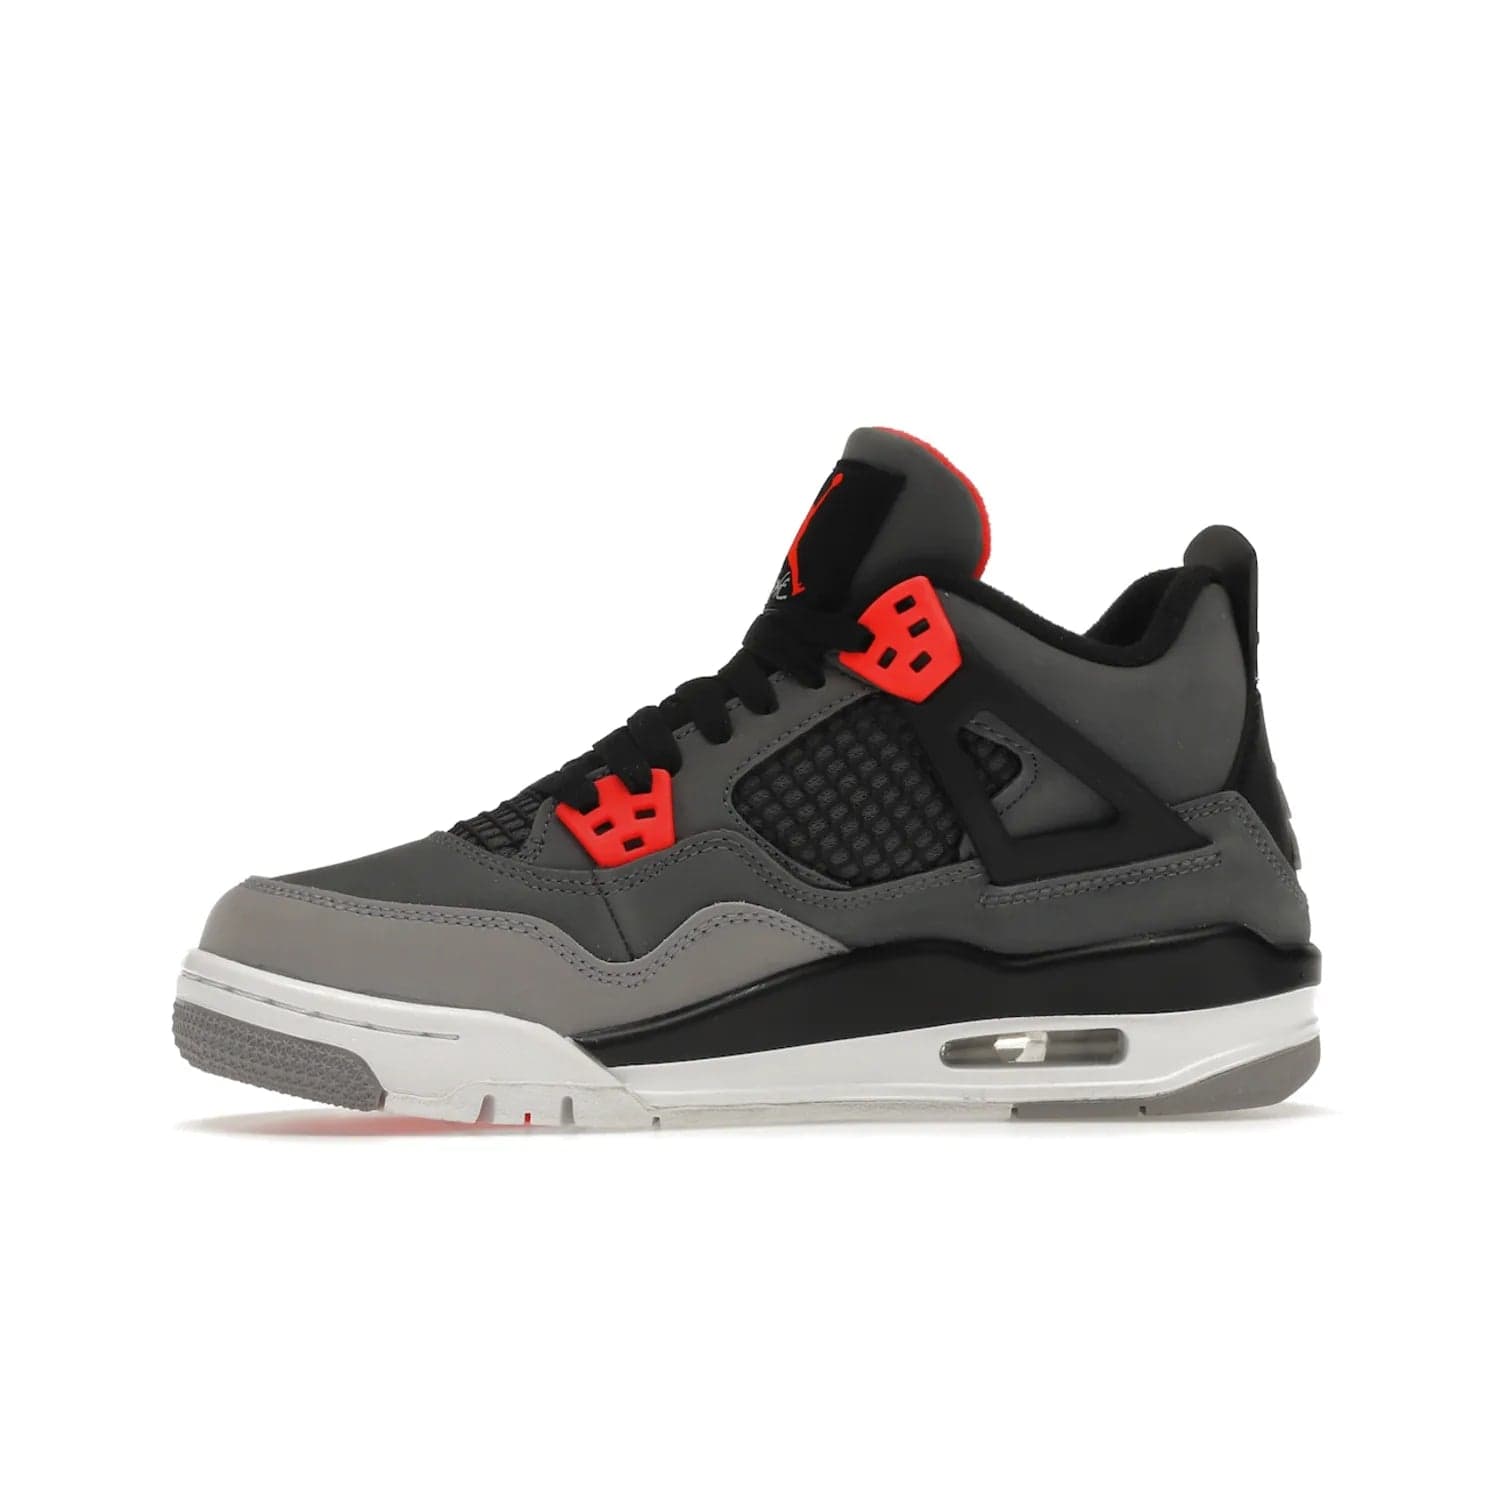 Jordan 4 Retro Infrared (GS) - Image 18 - Only at www.BallersClubKickz.com - Shop the Air Jordan 4 Retro Infrared (GS) for a classic silhouette with subtle yet bold features. Dark grey nubuck upper with lighter forefoot overlay, black accents, Infrared molded eyelets & woven tongue tag. Available June 2022.